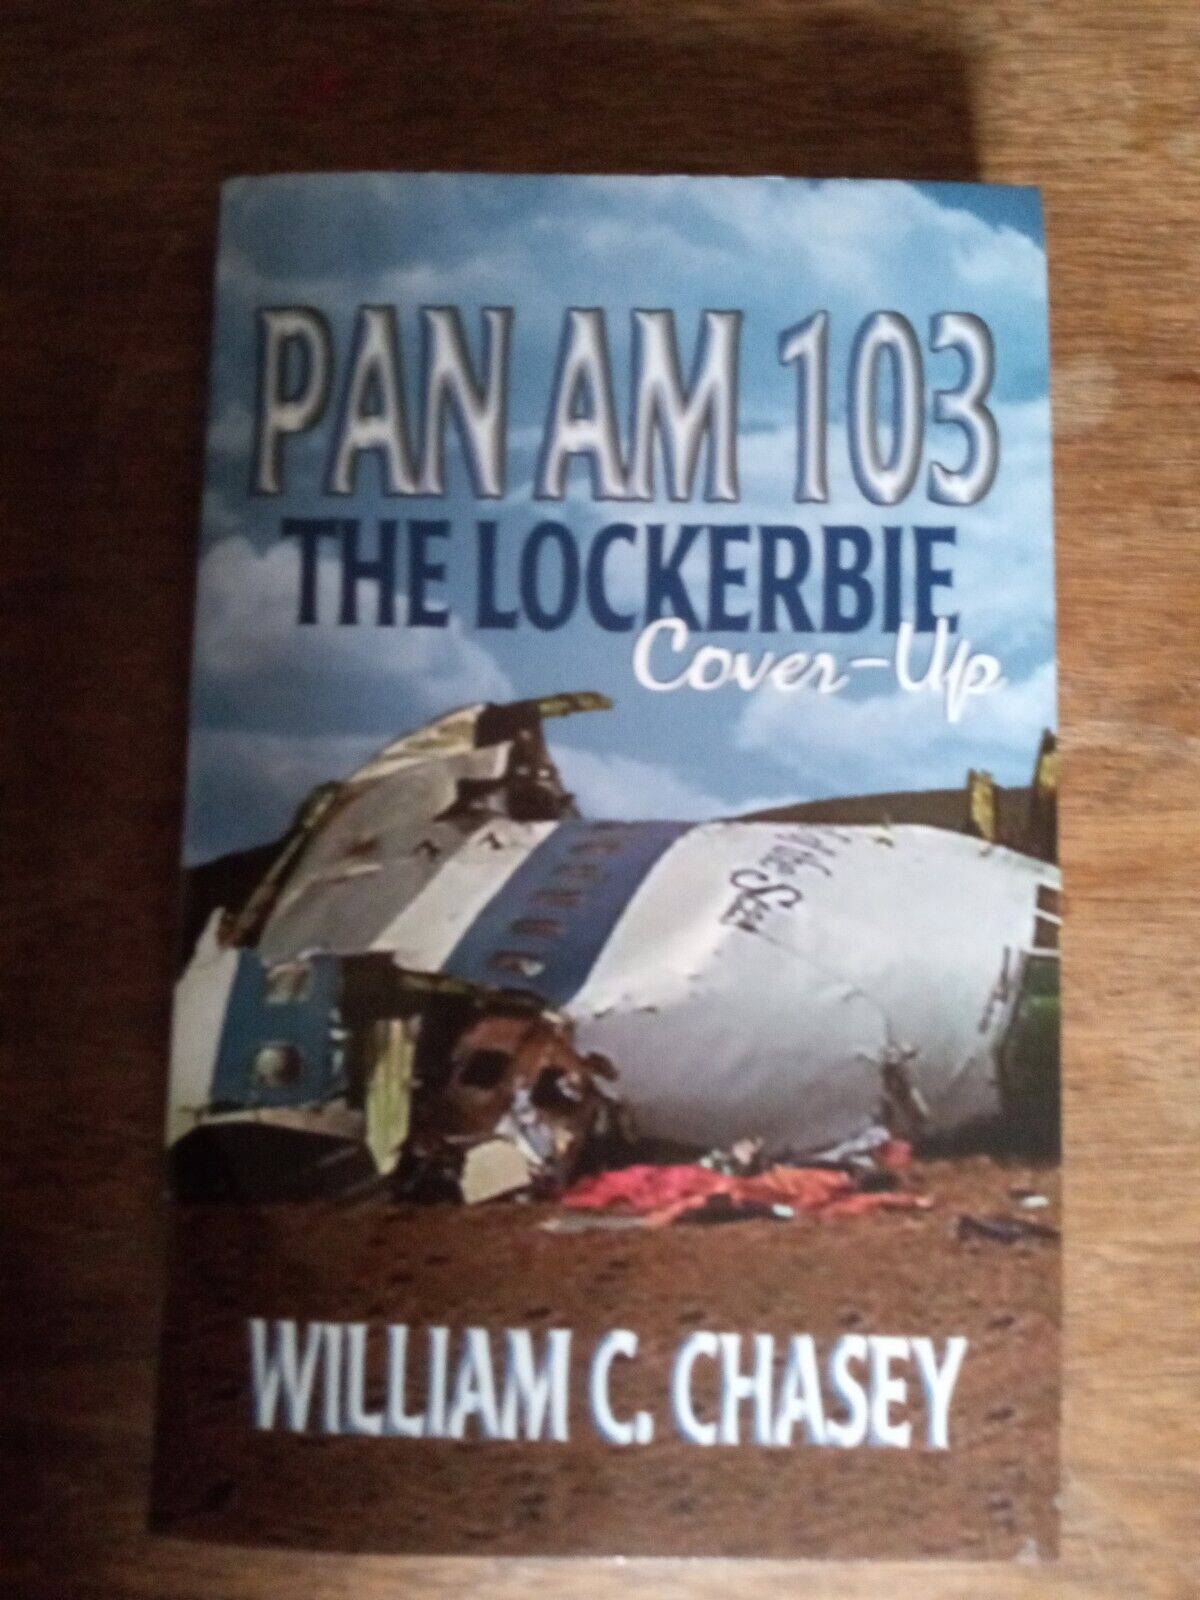 Pan Am 103 The Lockerbie Cover-Up by William C Chasey